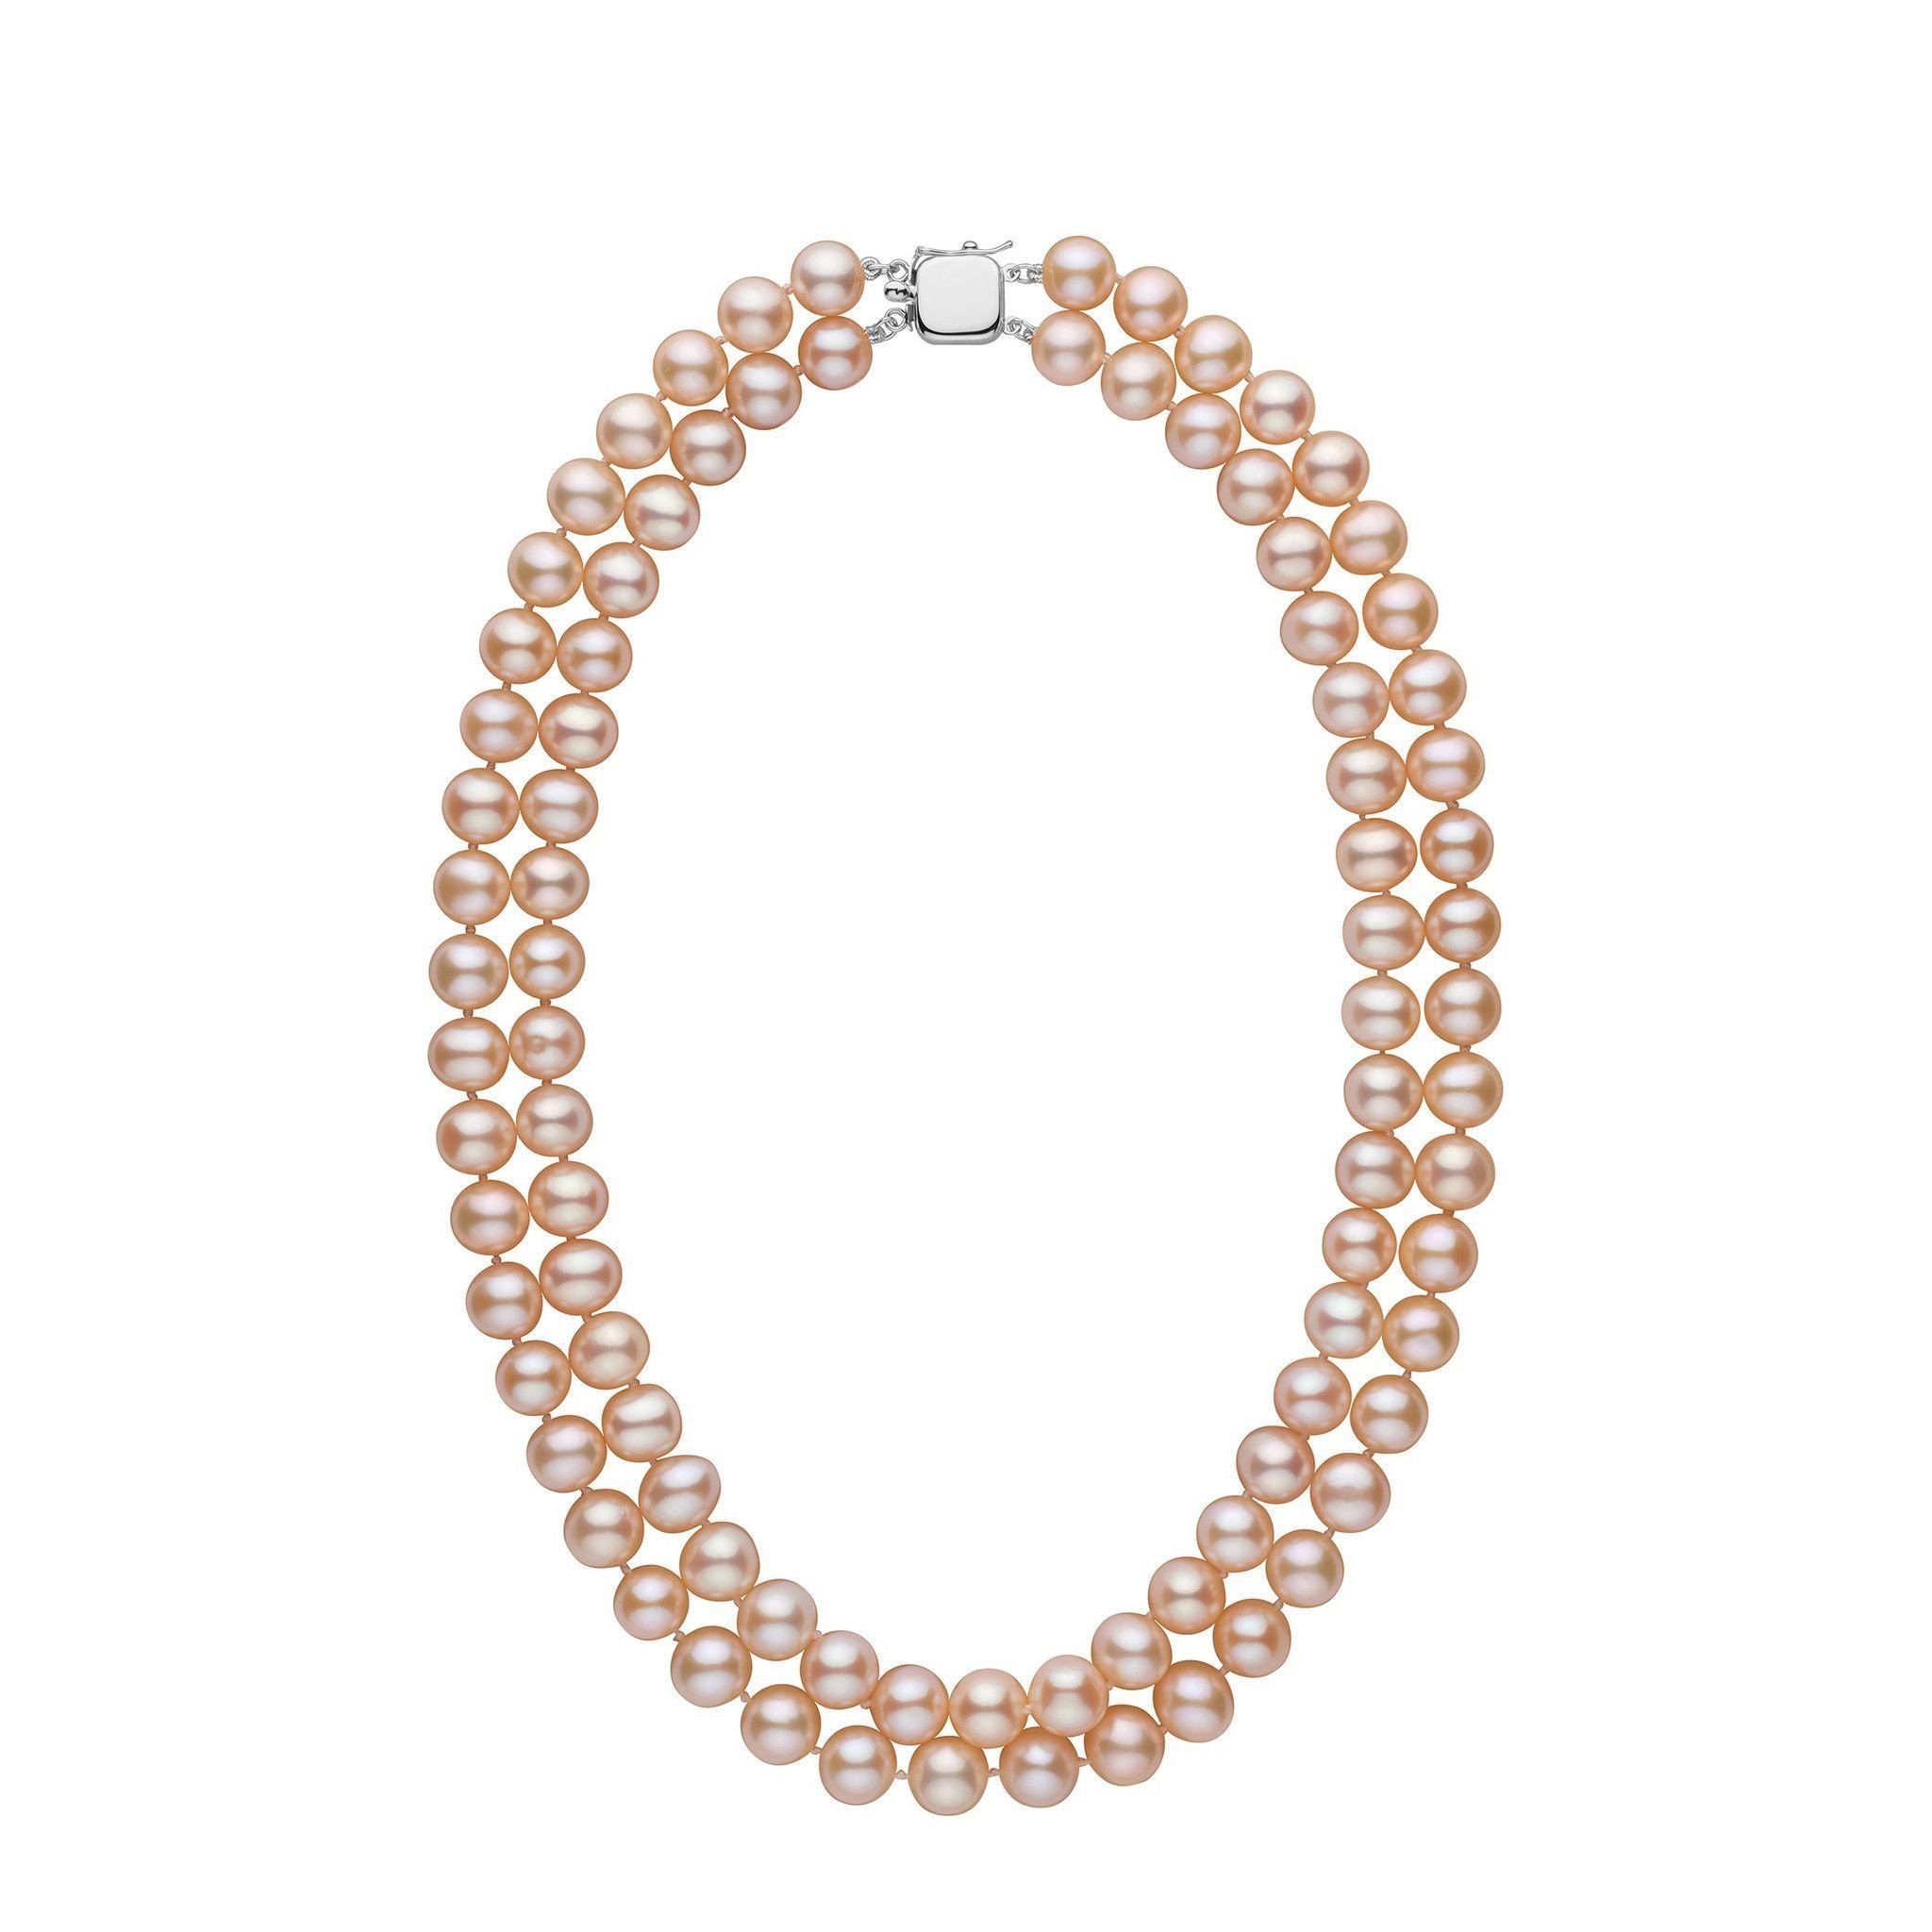 Double Strand 8.5-9.0 mm AA+ Pink to Peach Freshwater Pearl Necklace